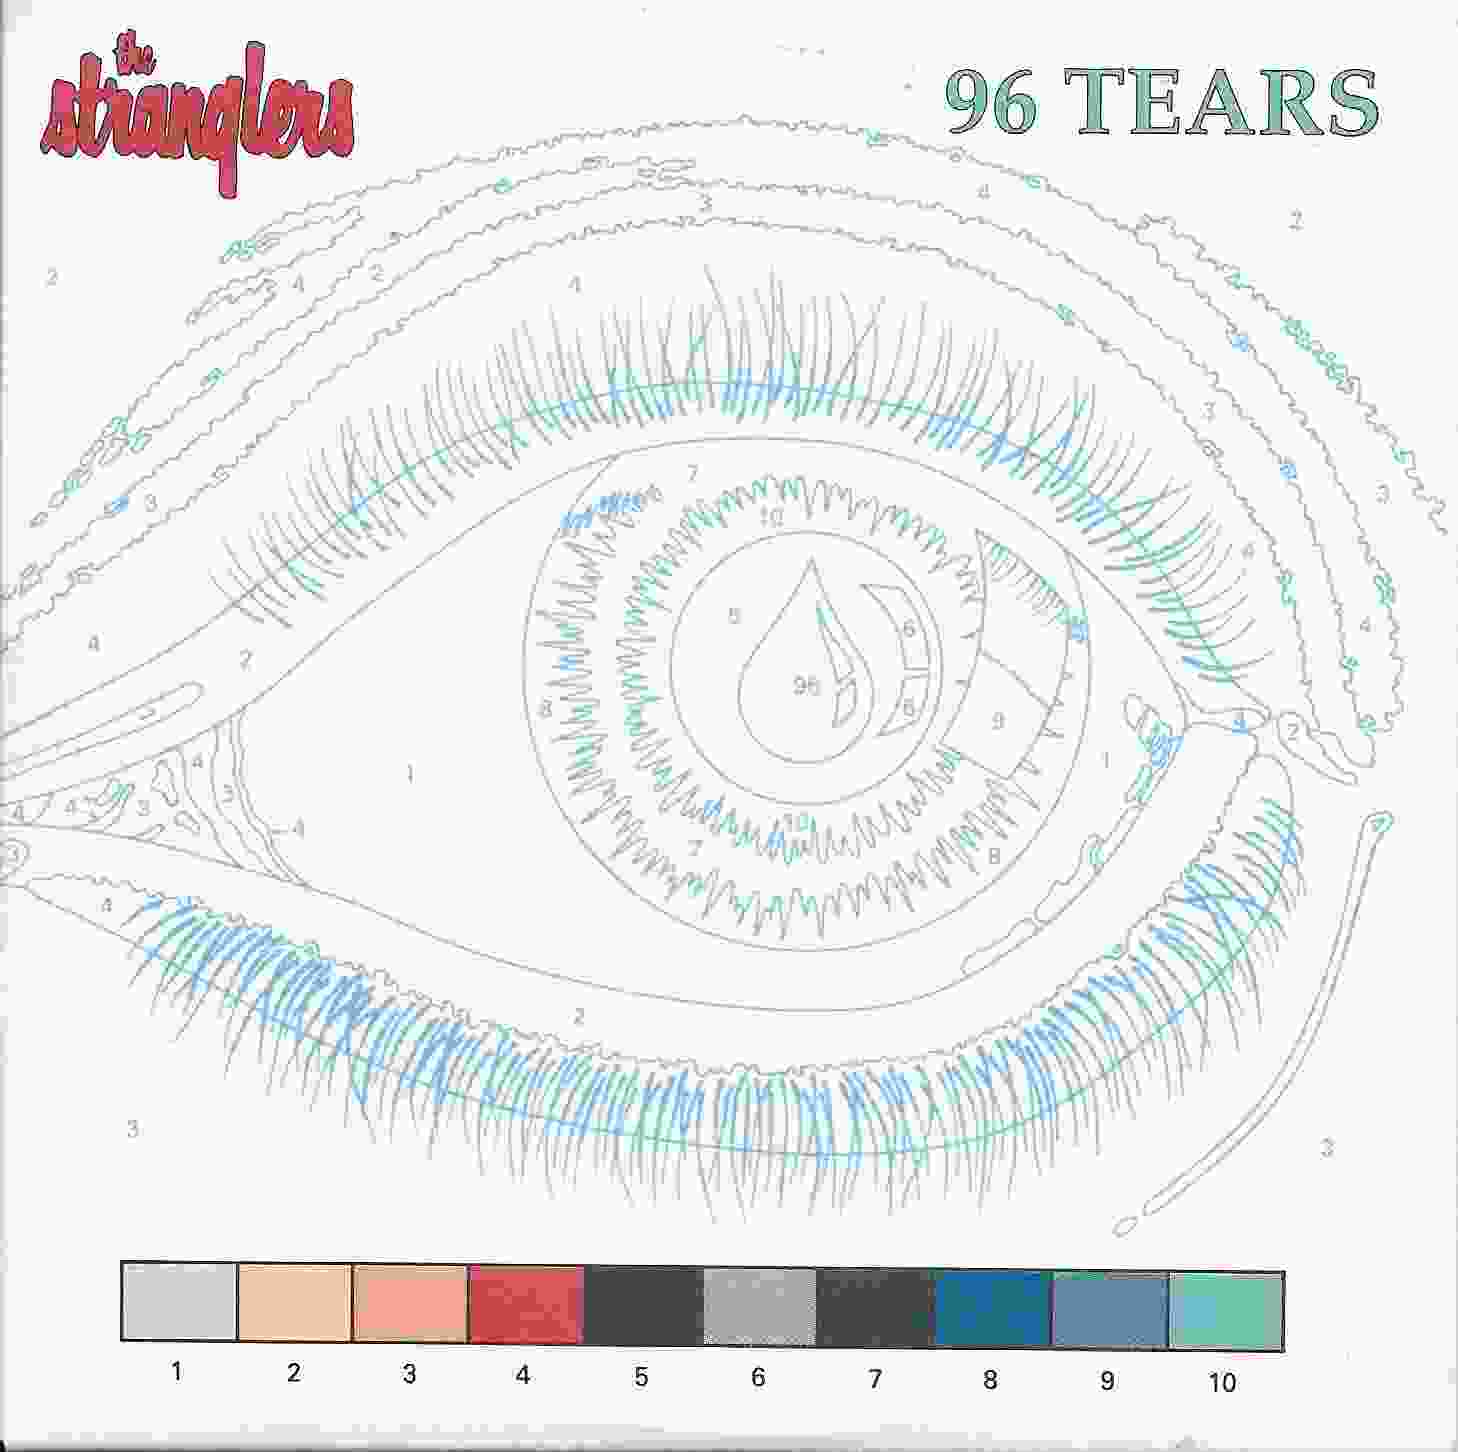 Picture of TEARS C 1 96 tears by artist The Stranglers  from The Stranglers